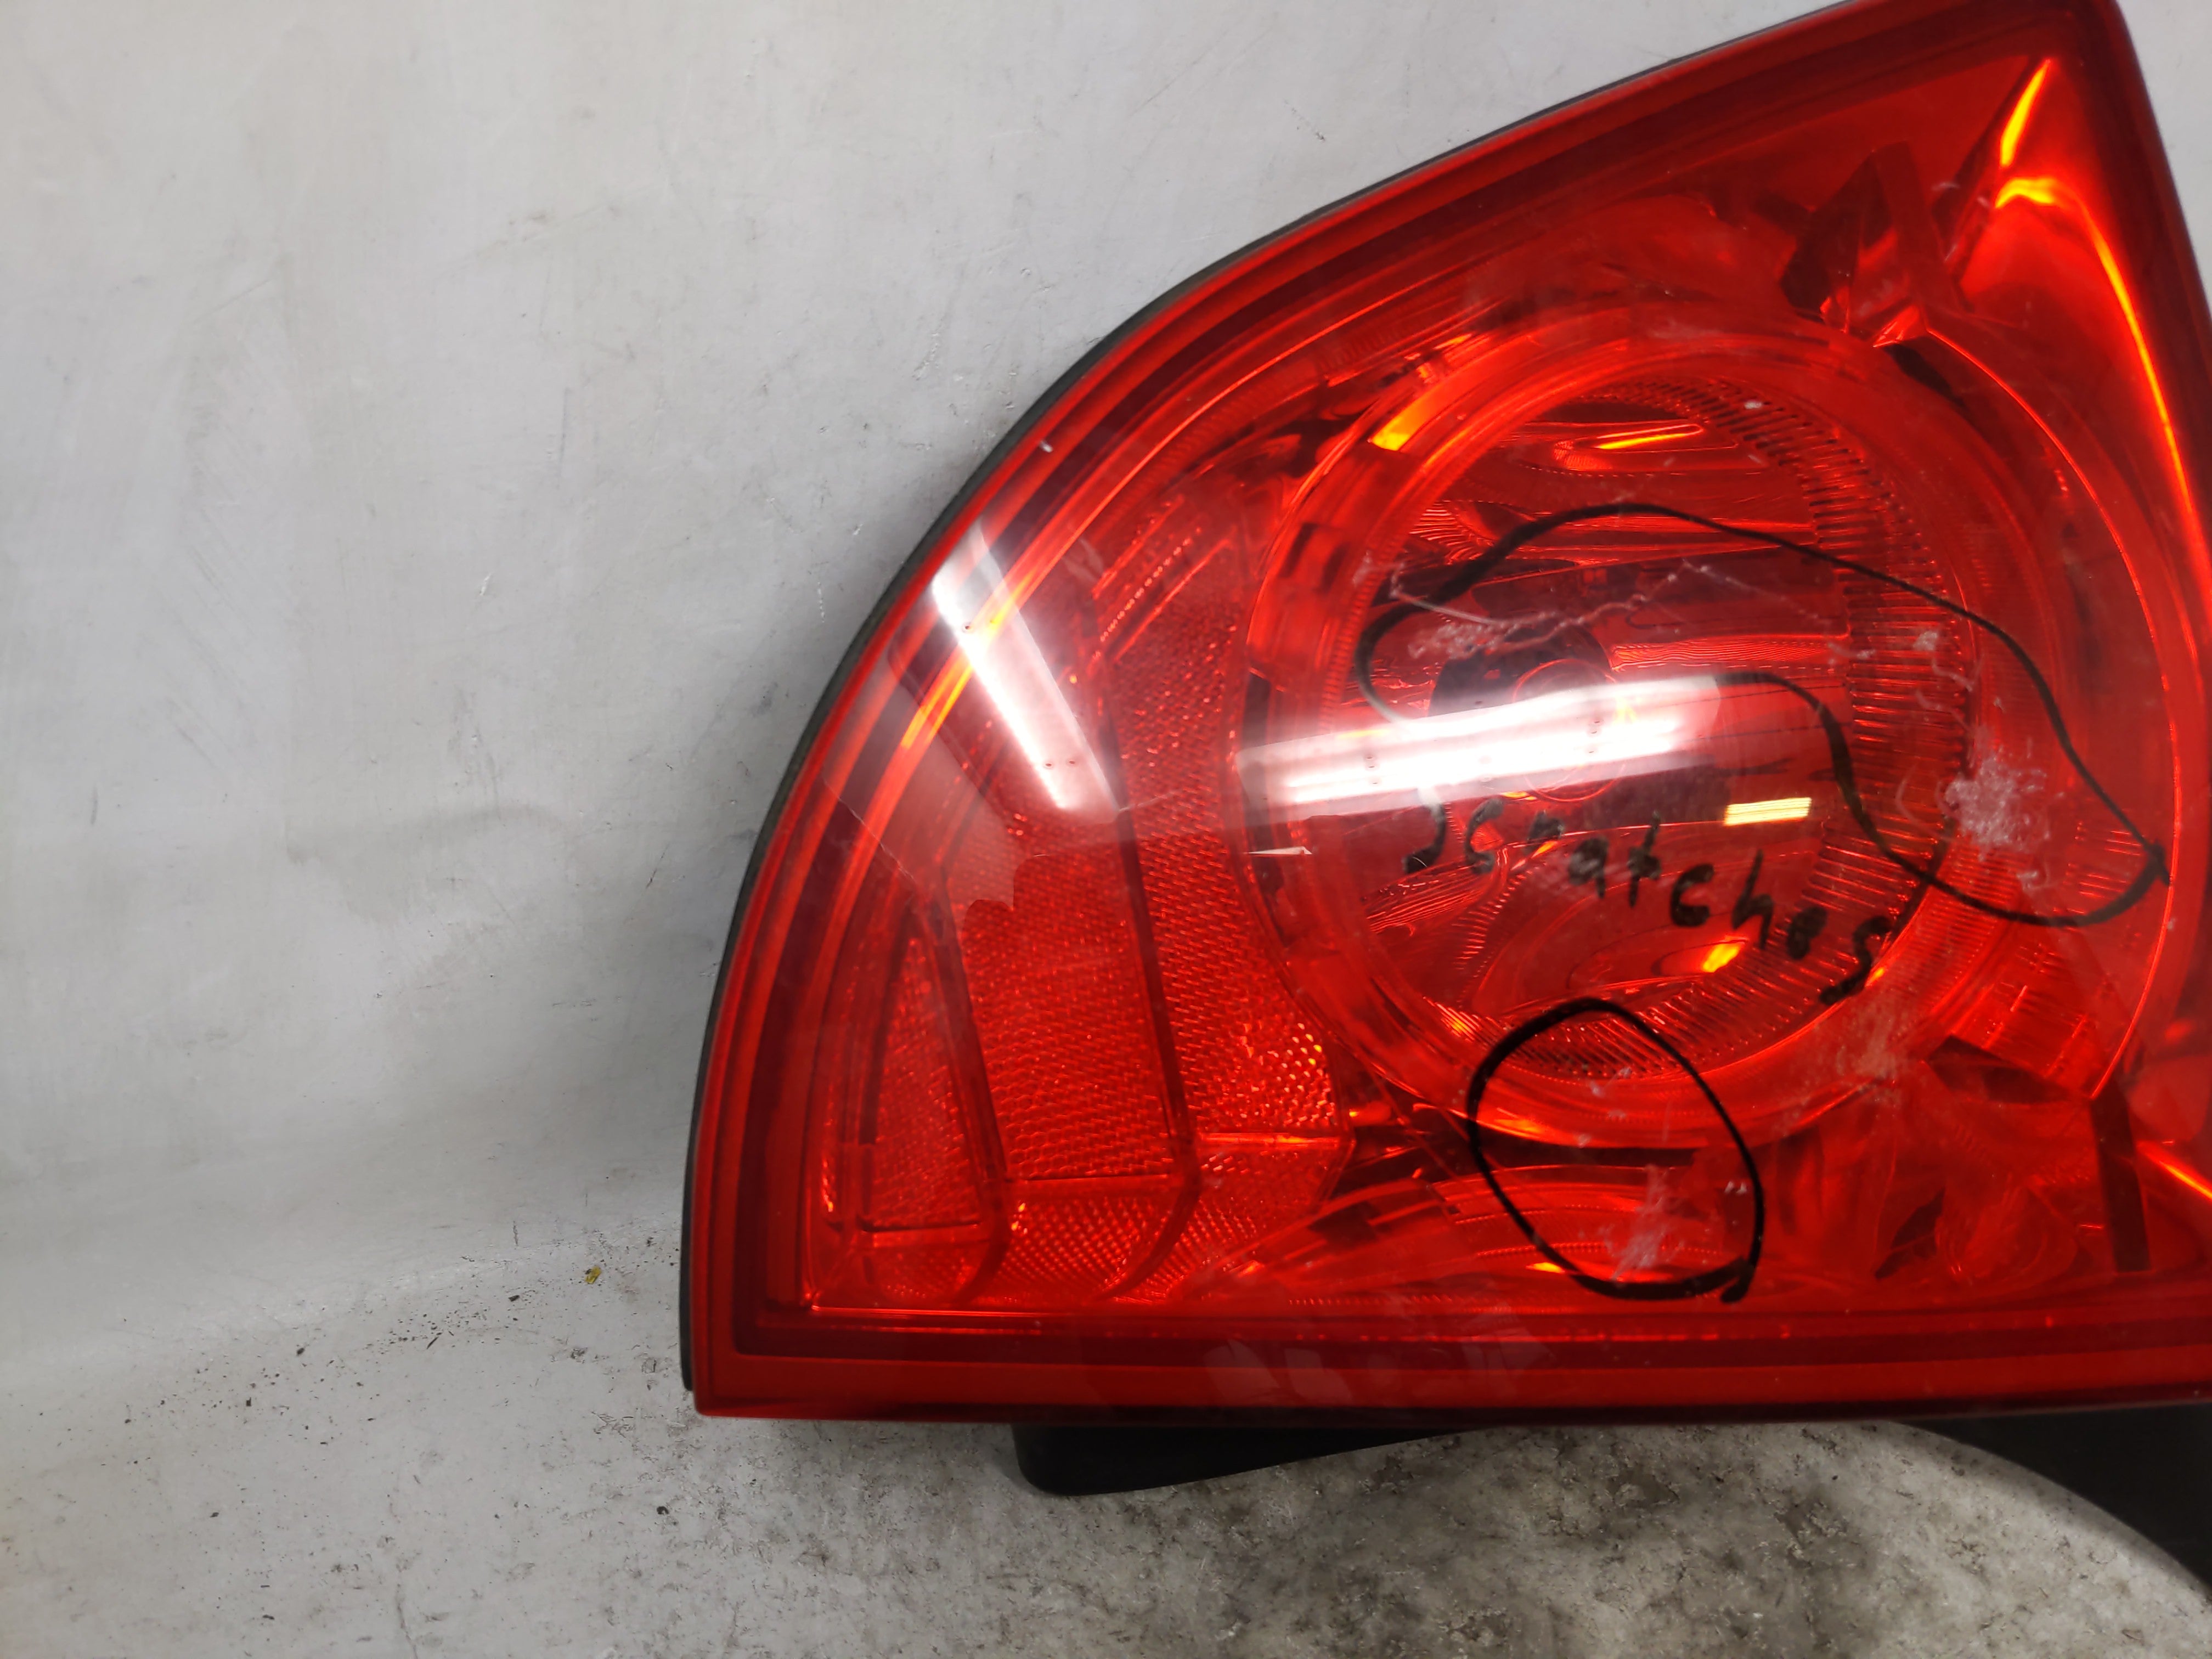 2010 Chevrolet Malibu Tail Light Assembly Passenger Right OEM P/N:25879007 Fits 2008 2009 2011 2012 OEM Used Auto Parts - Oemusedautoparts1.com